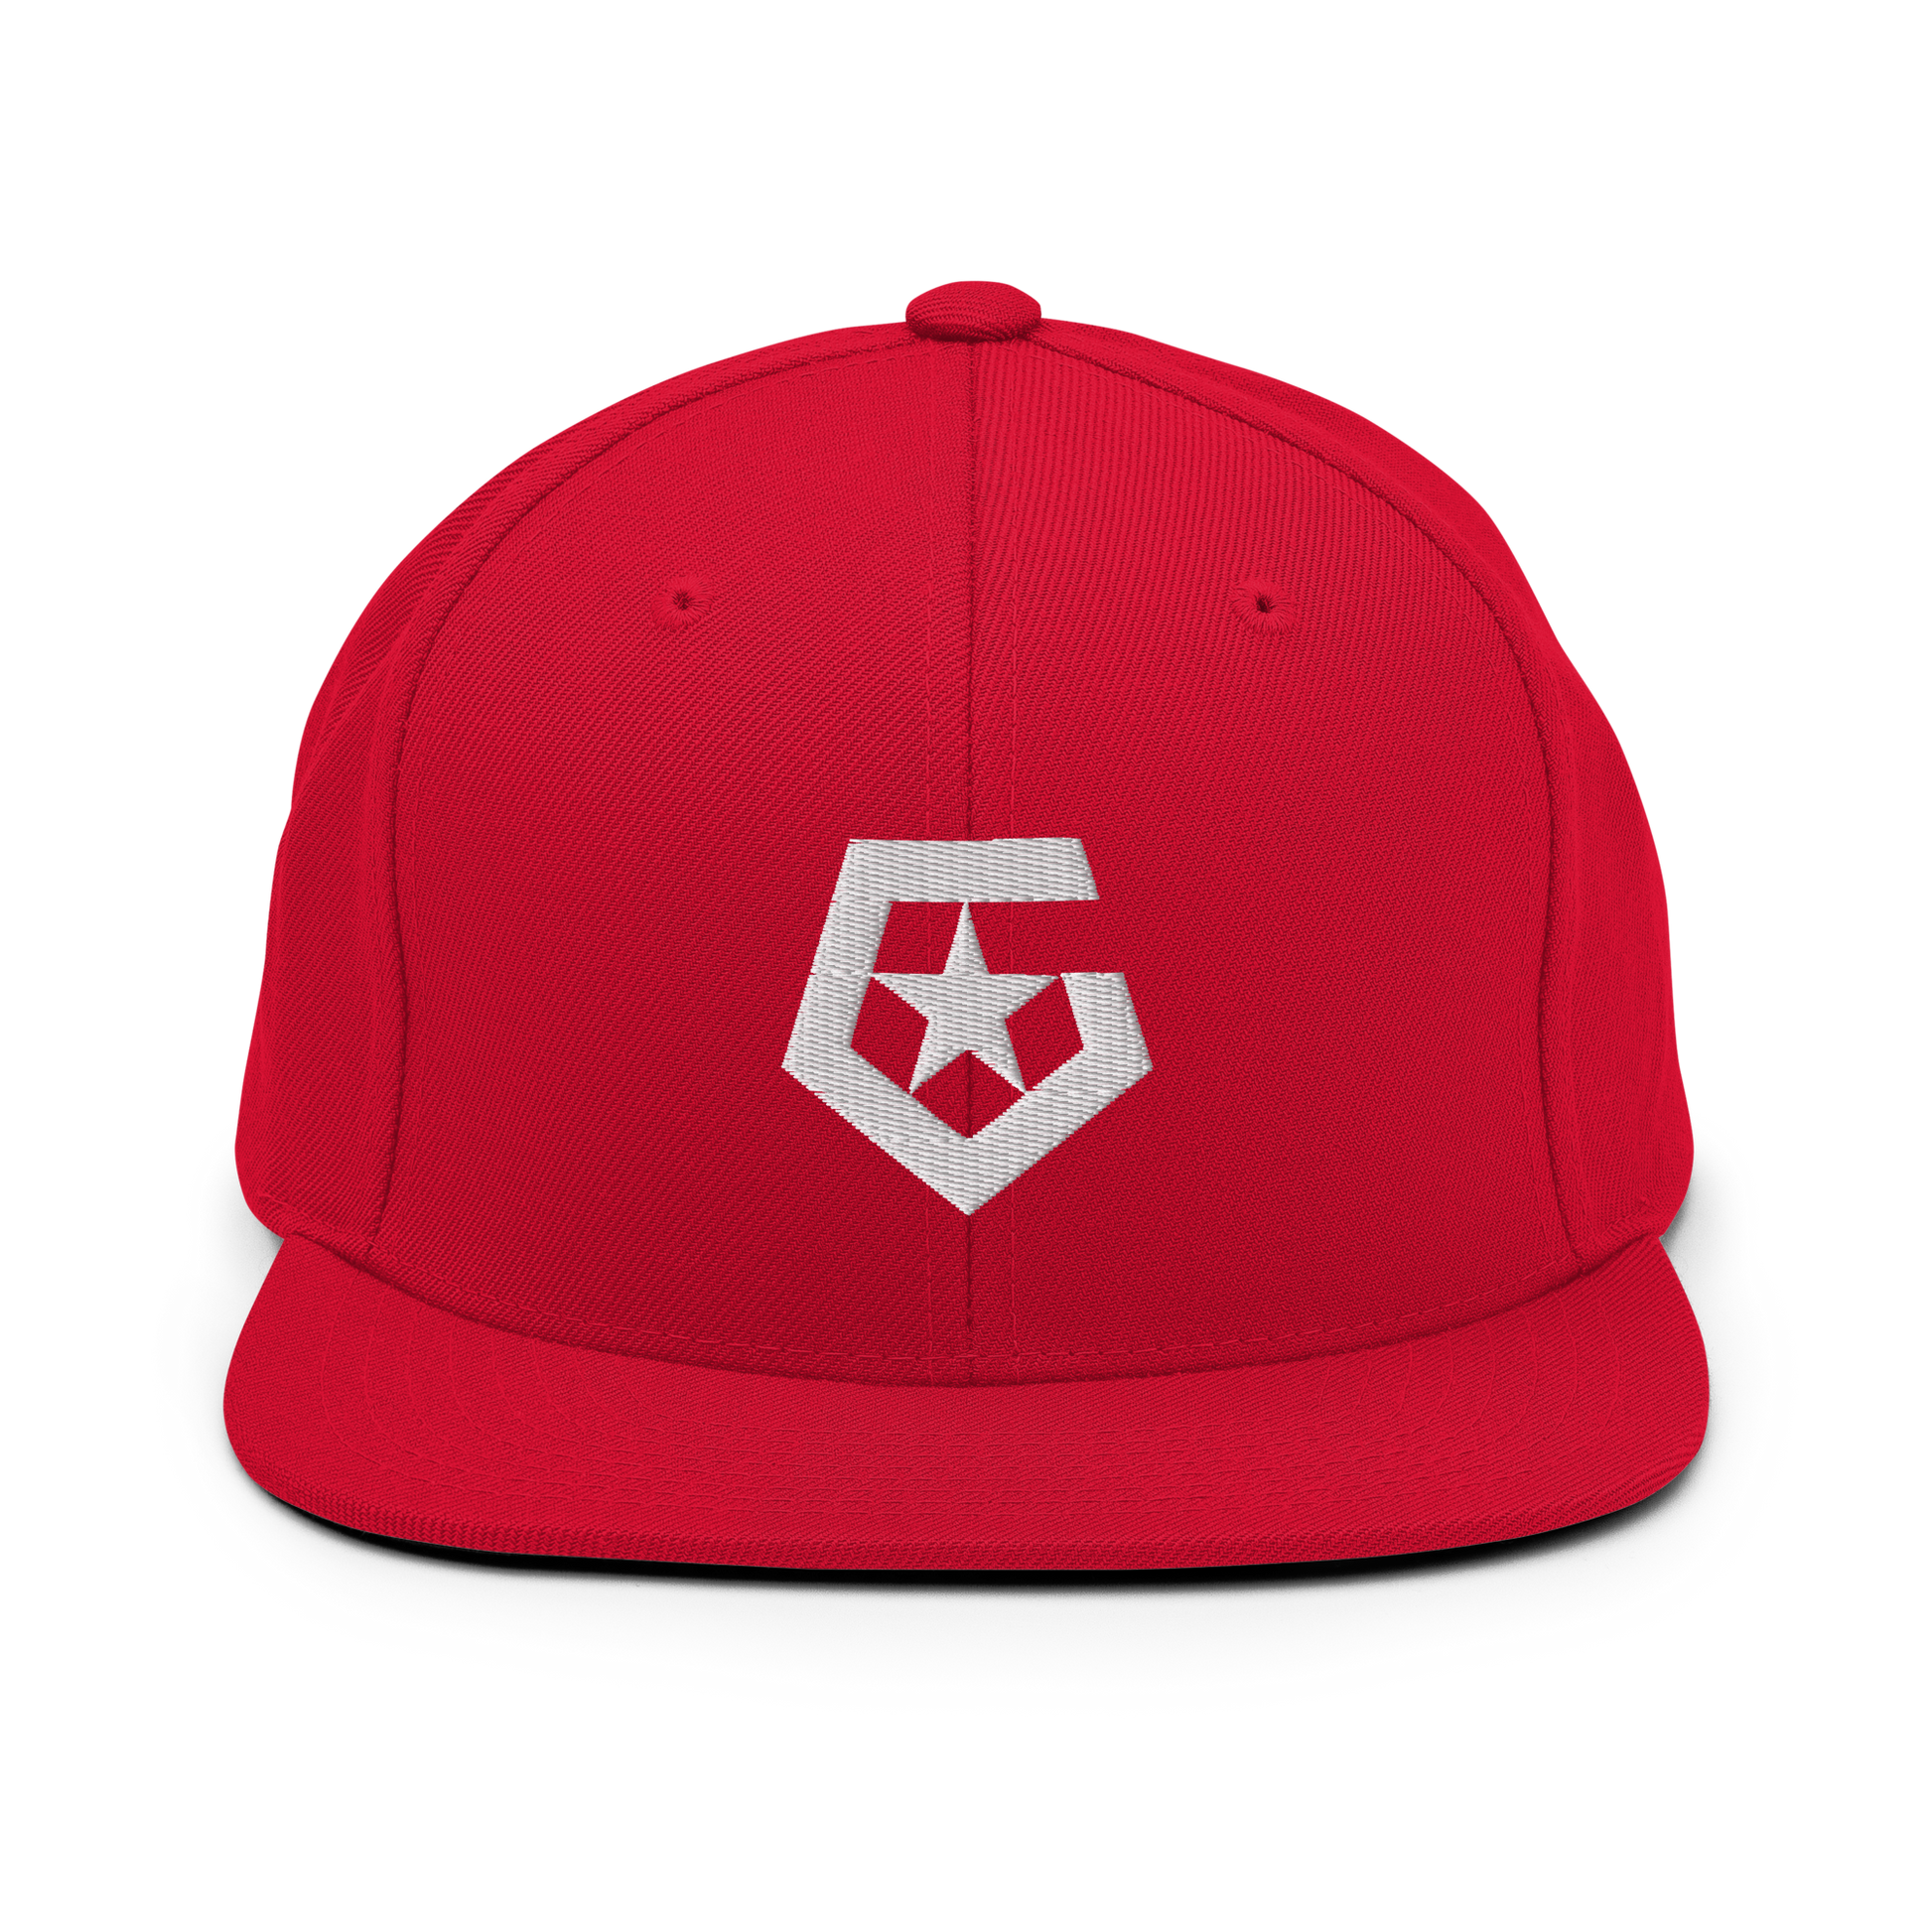 GENERAL STAR SNAPBACK - The General Booty Official Shop by More Than Just A Name | MTJN